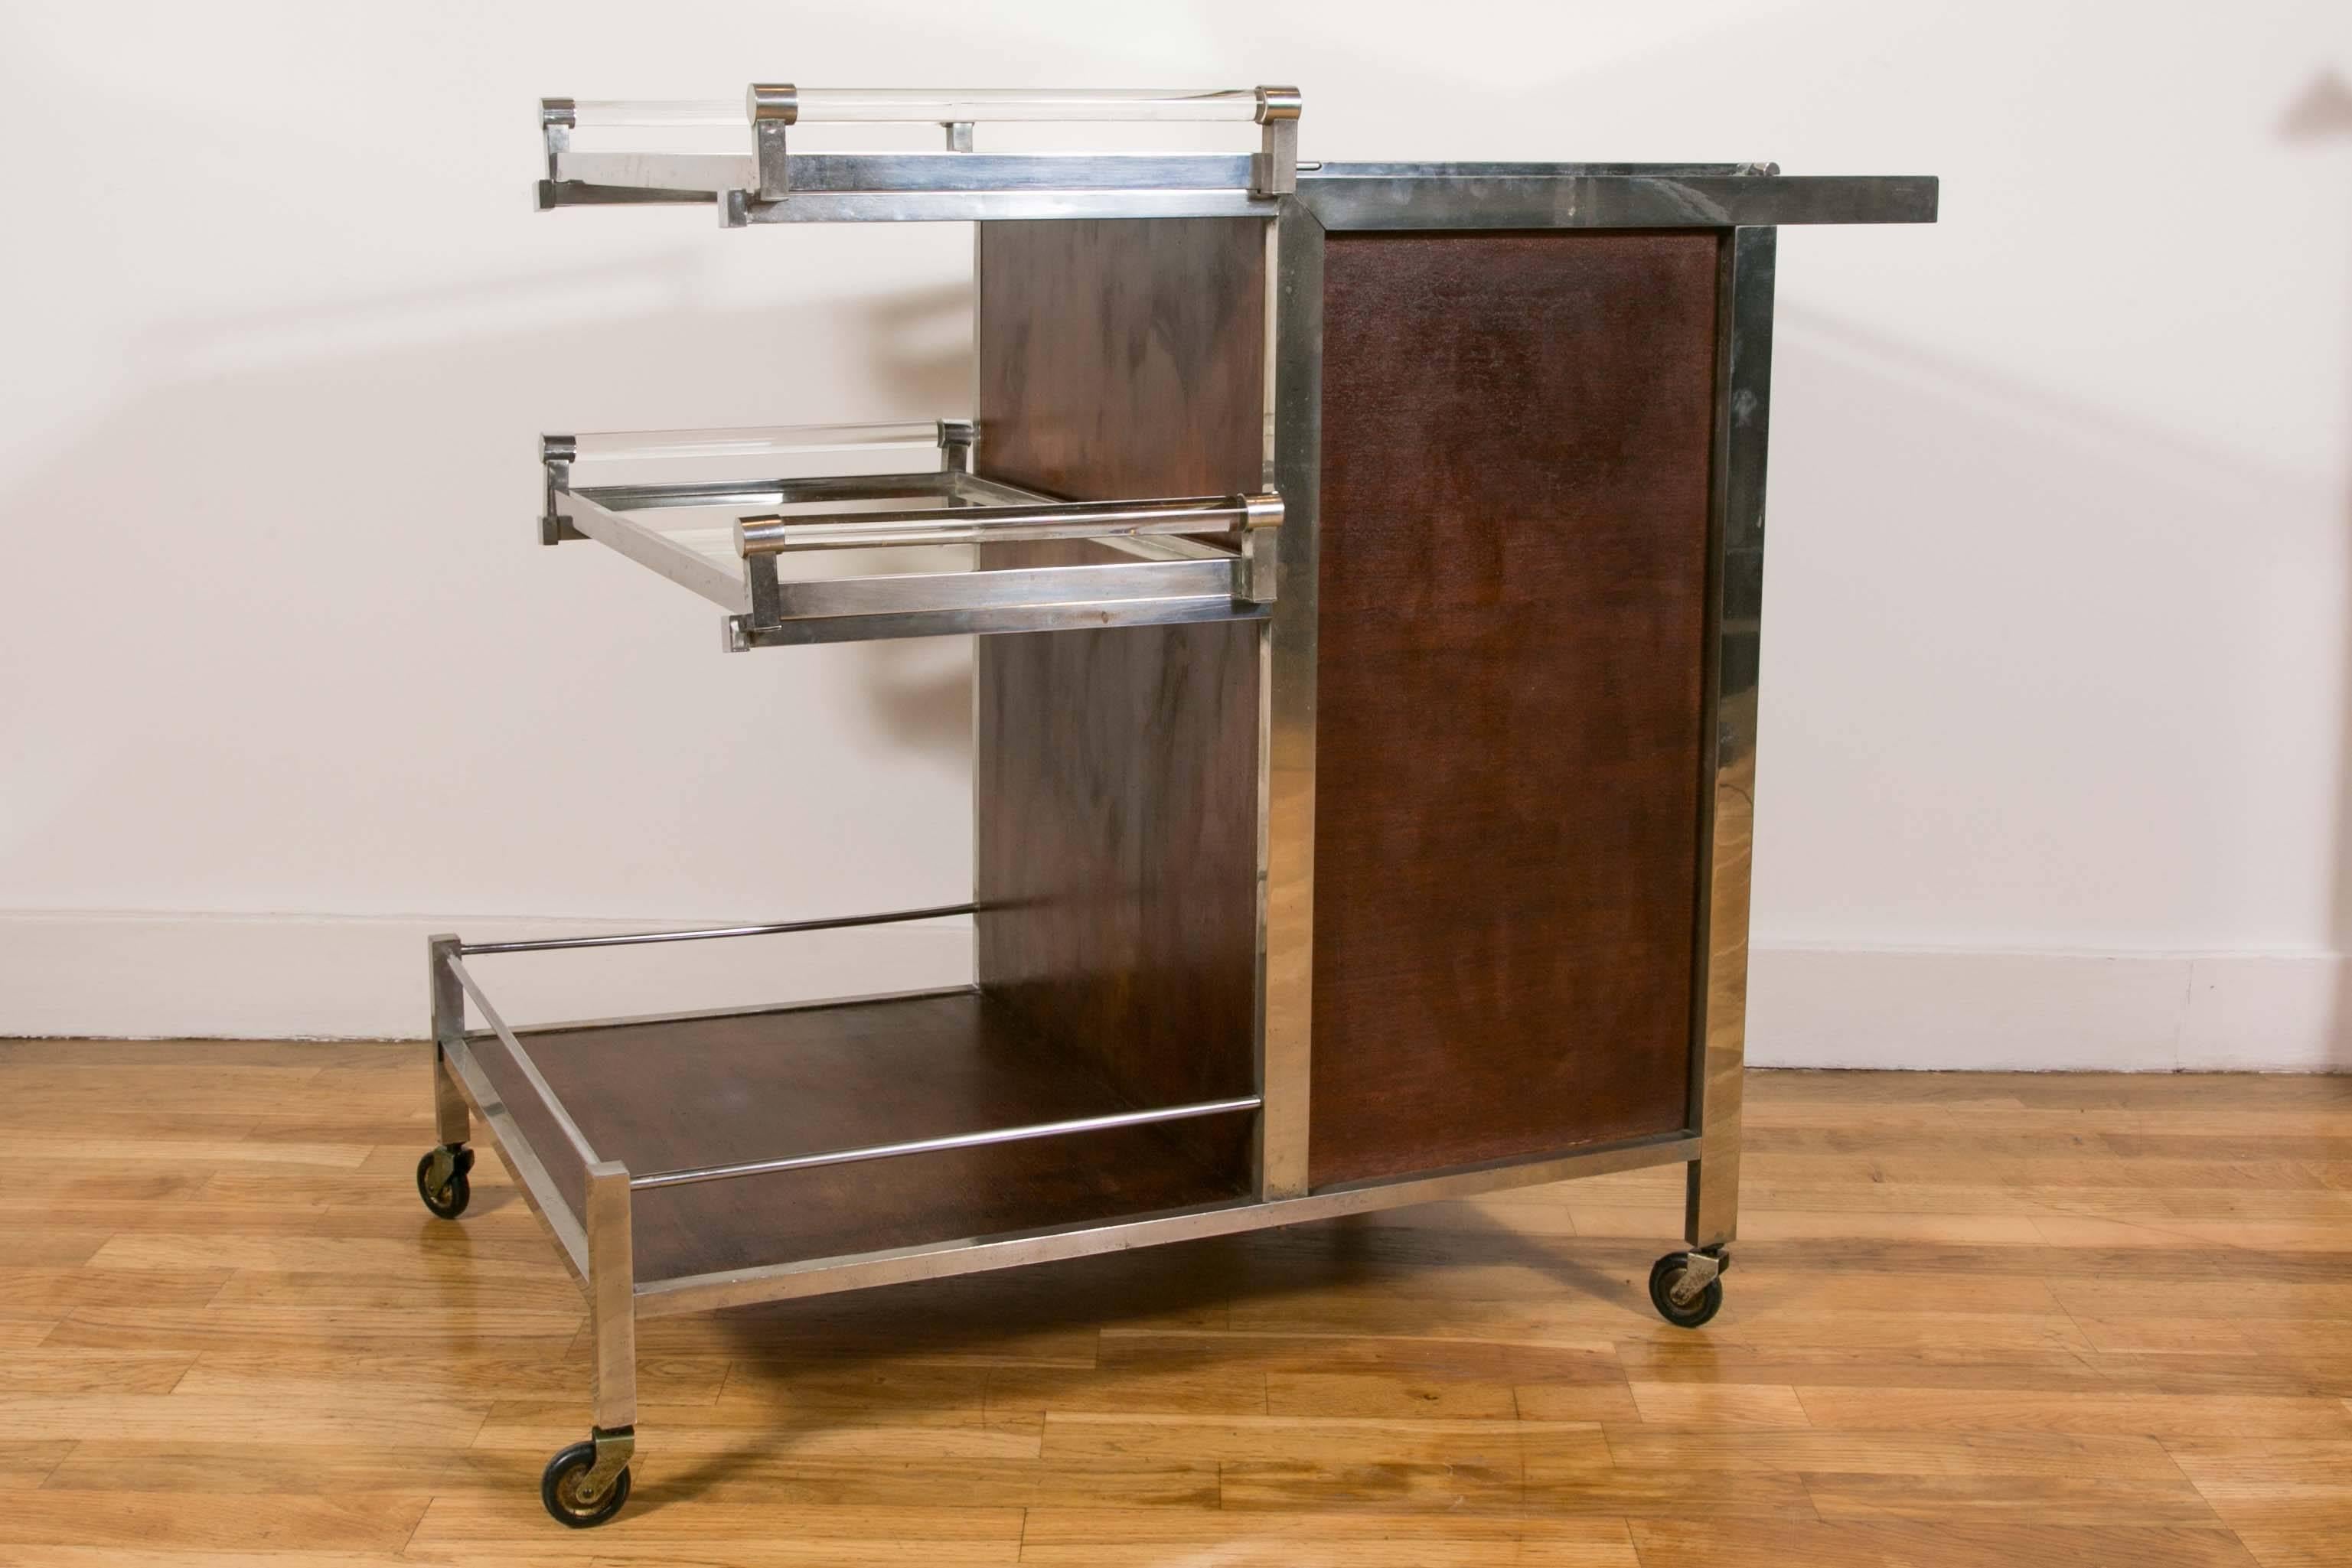 Bar cart/dry bar by Jacques Adnet (1900-1984). Mahogany, nickel-plated metal, mirrors and glass. Two removable trays, one top compartment, one compartment with two doors for bottles and glasses with glass holders. Tray handles and pushbar in solid